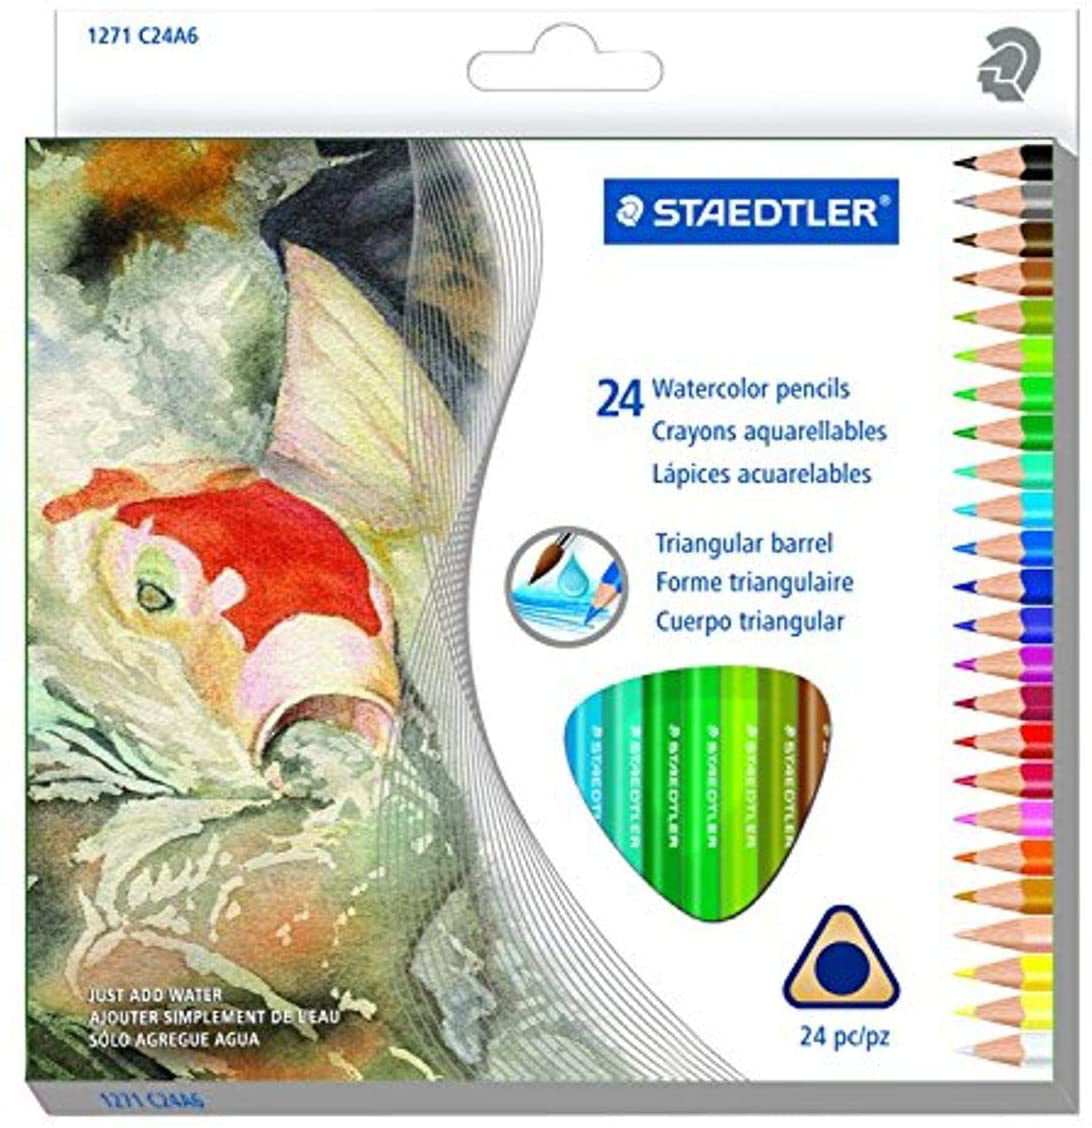 STAEDTLER AQUARELL WATERCOLOUR PENCILS Boxes of 12 or 24 coloured pencils 